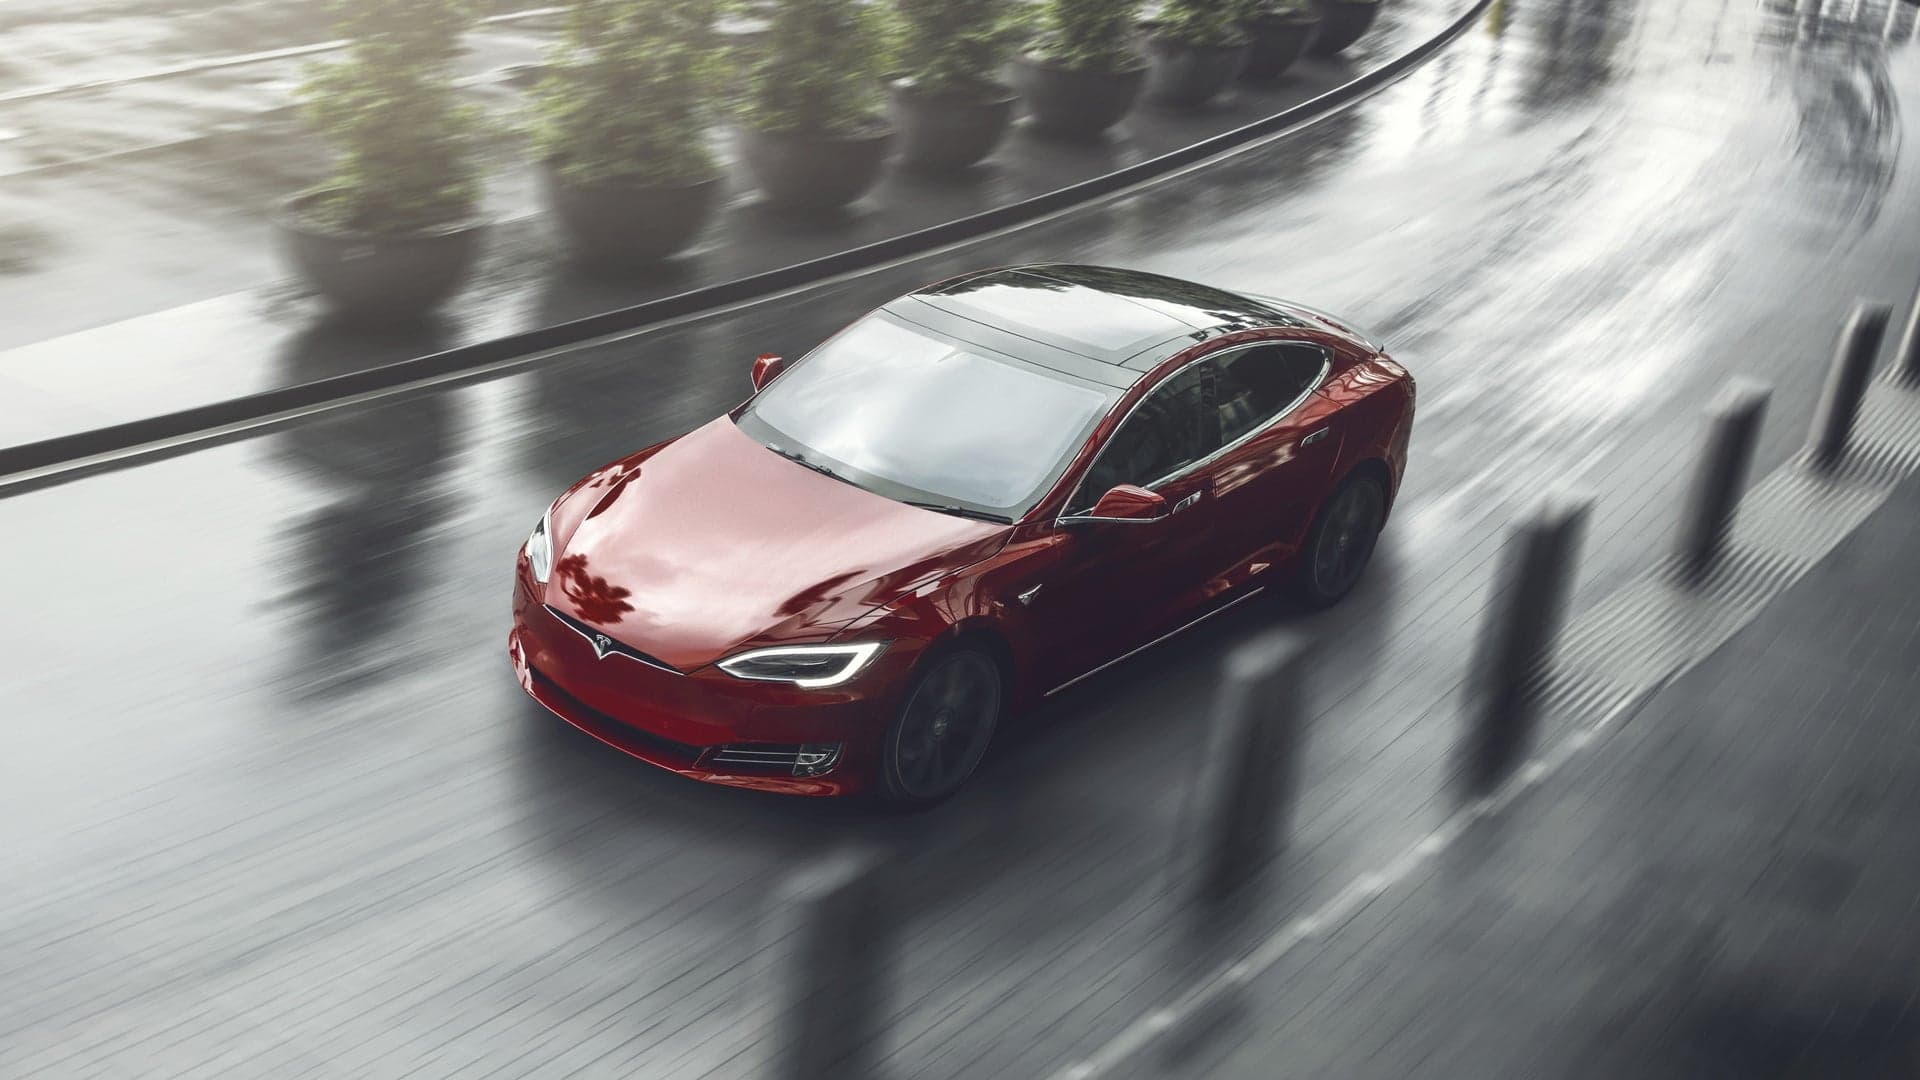 Tesla’s New Auto Insurance Service Get Mixed Reviews From Vehicle Owners